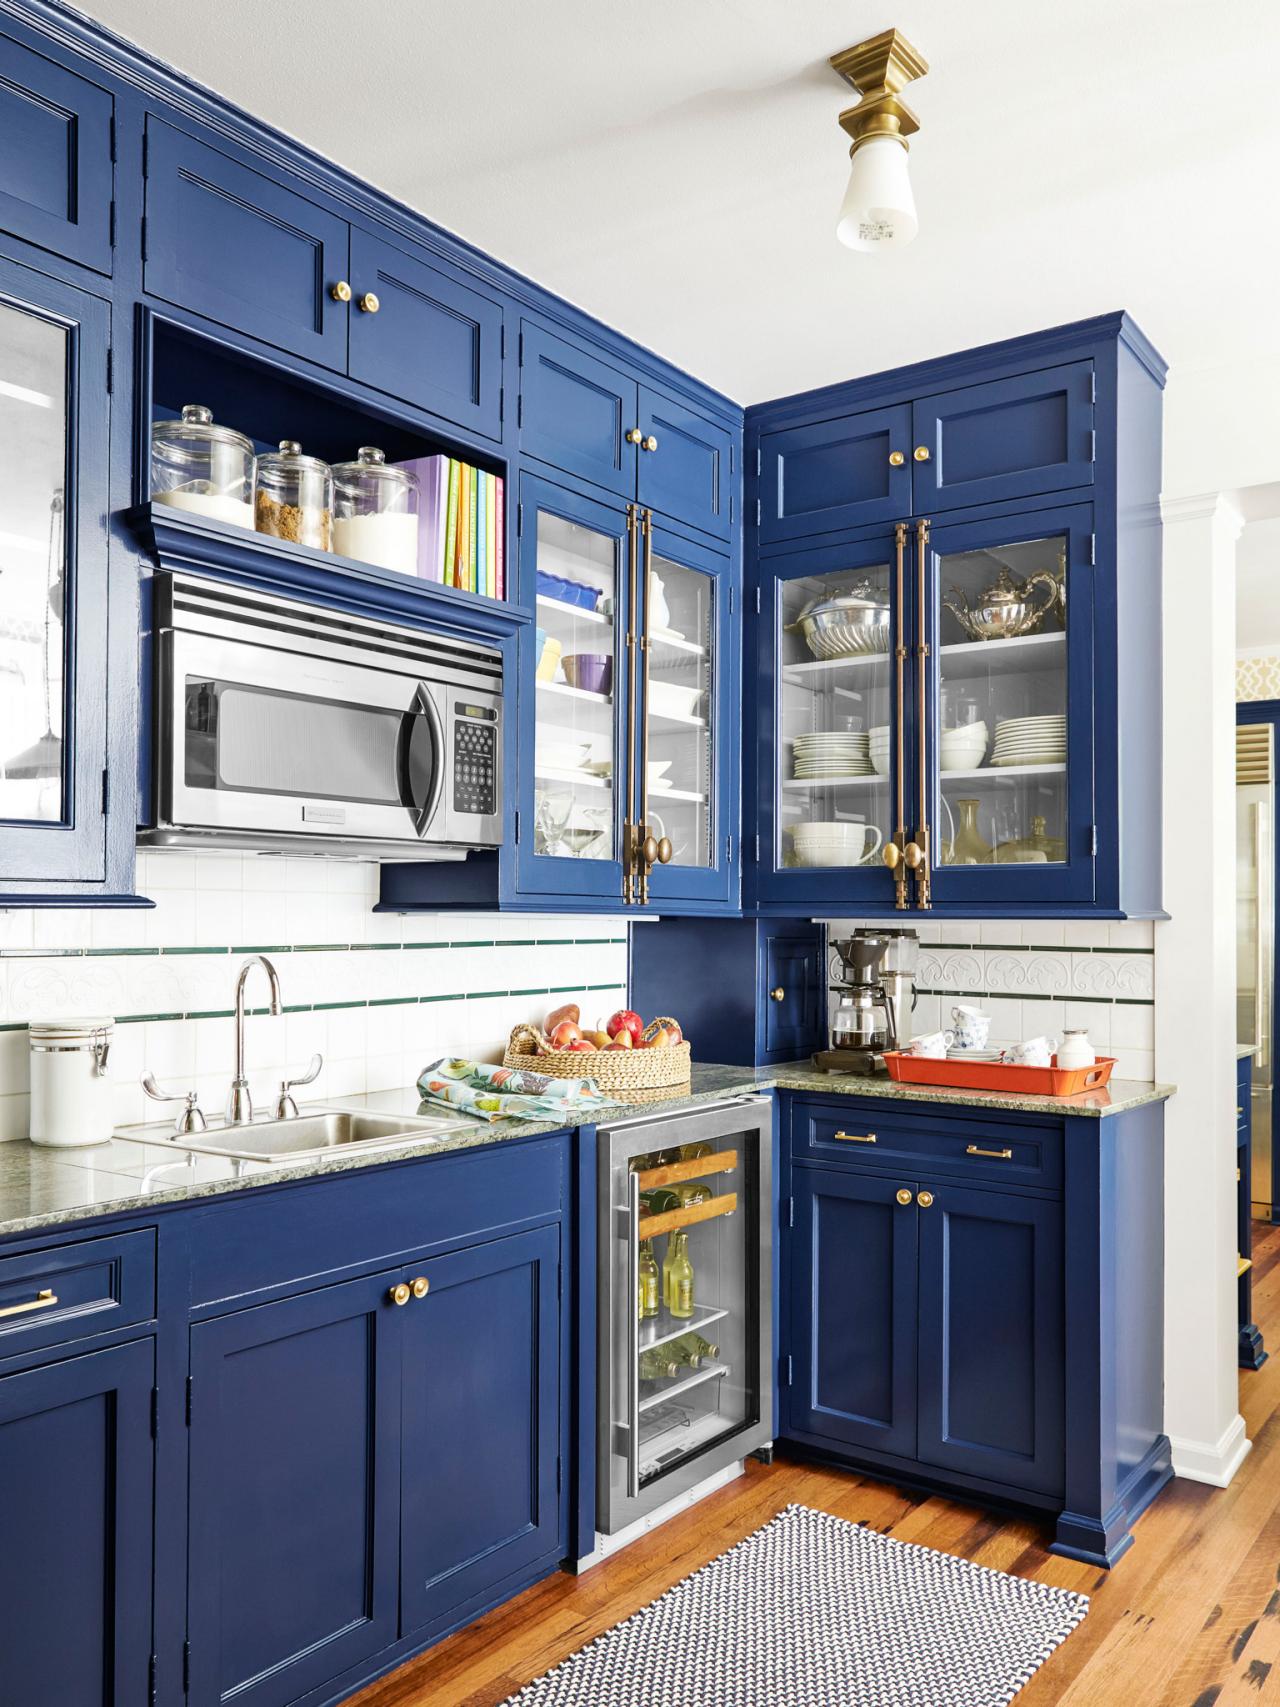 How to Paint Cabinets   HGTV